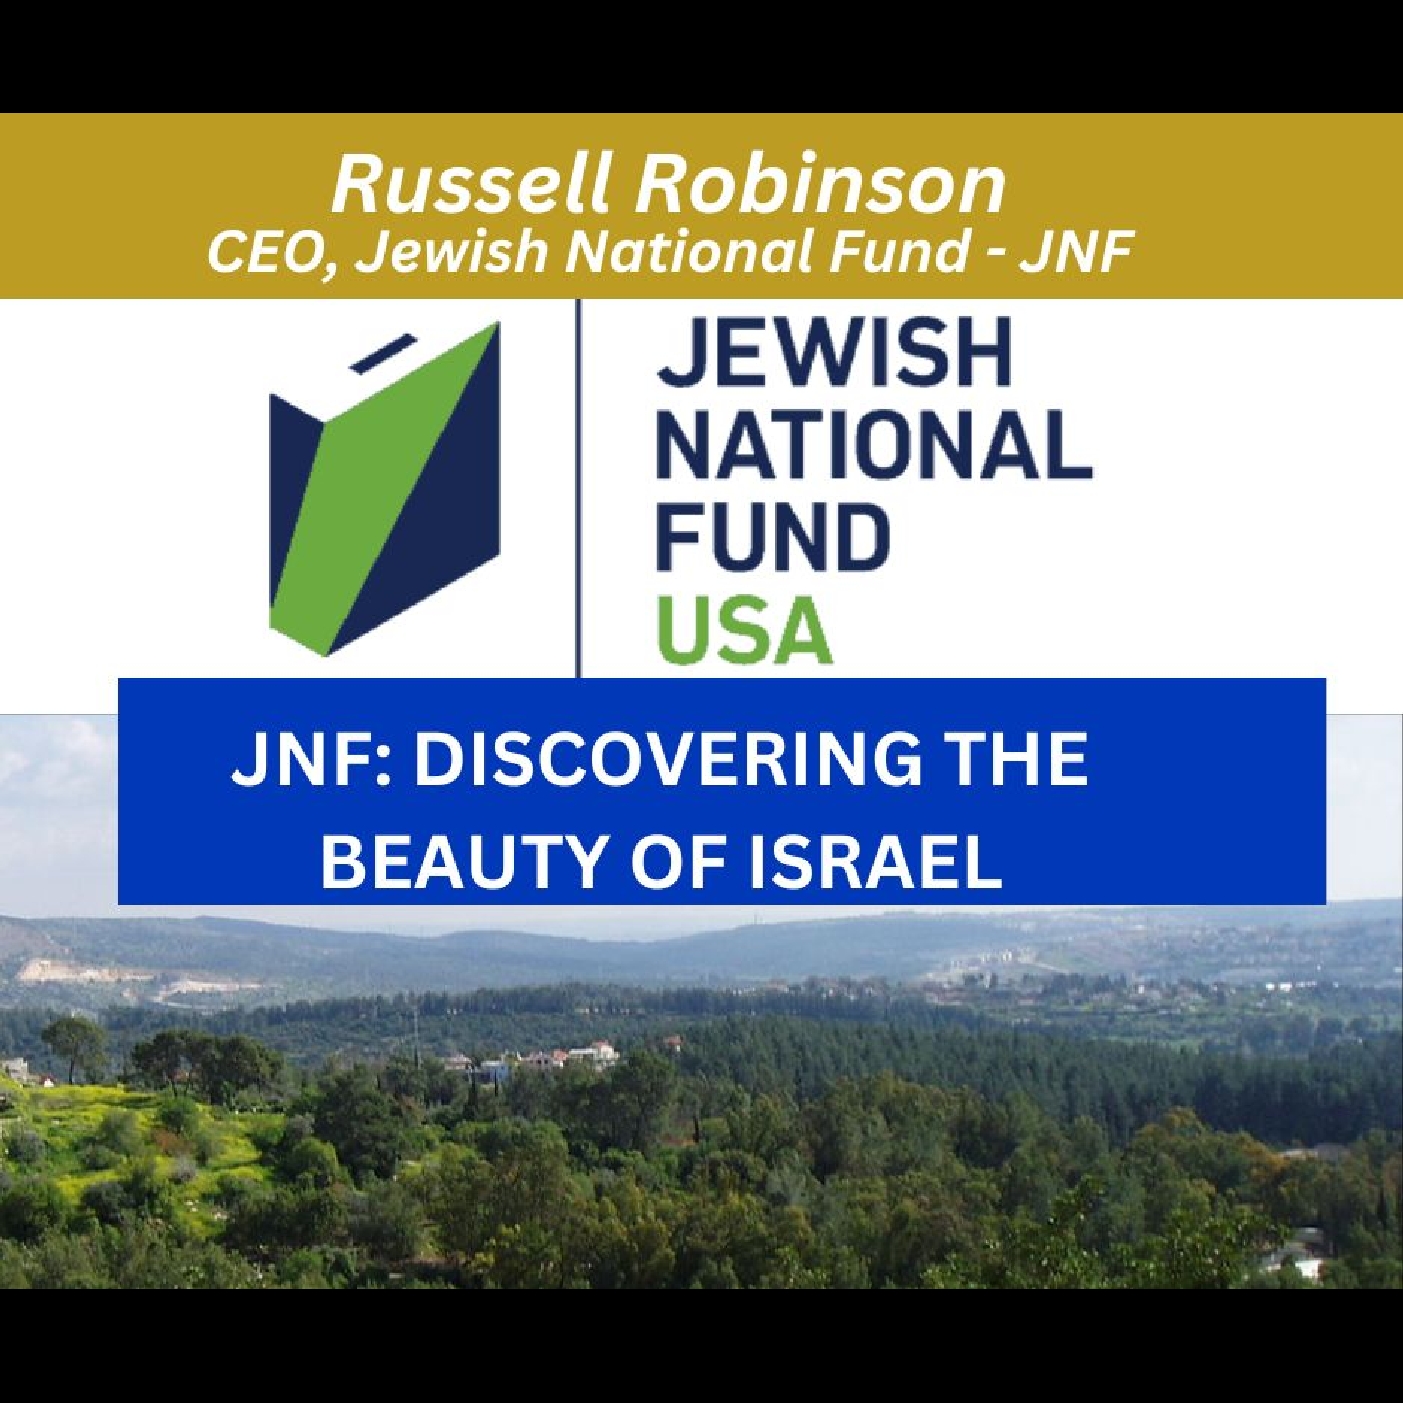 Discovering the Beauty & Heartbeat of Israel - Russell Robinson, CEO, Jewish National Fund, JNF